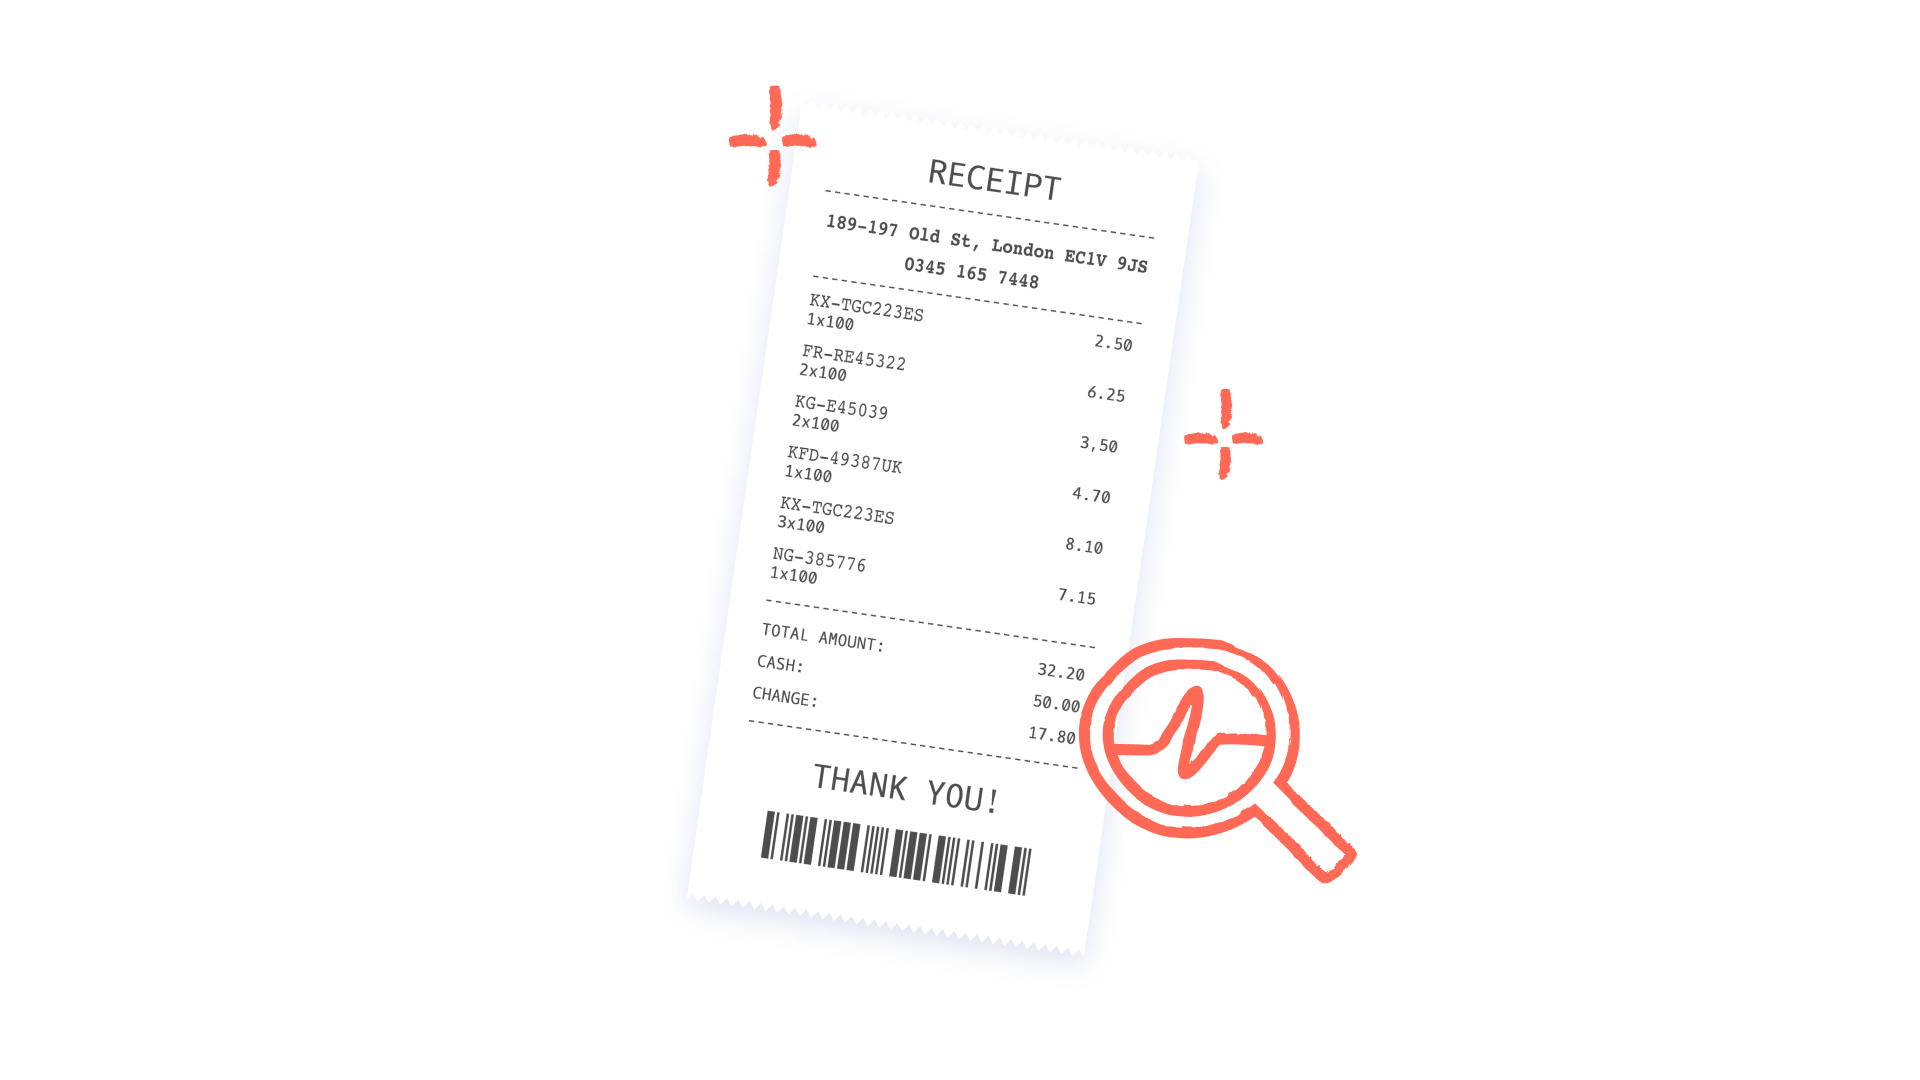 See every bill in detail with Osome purchases